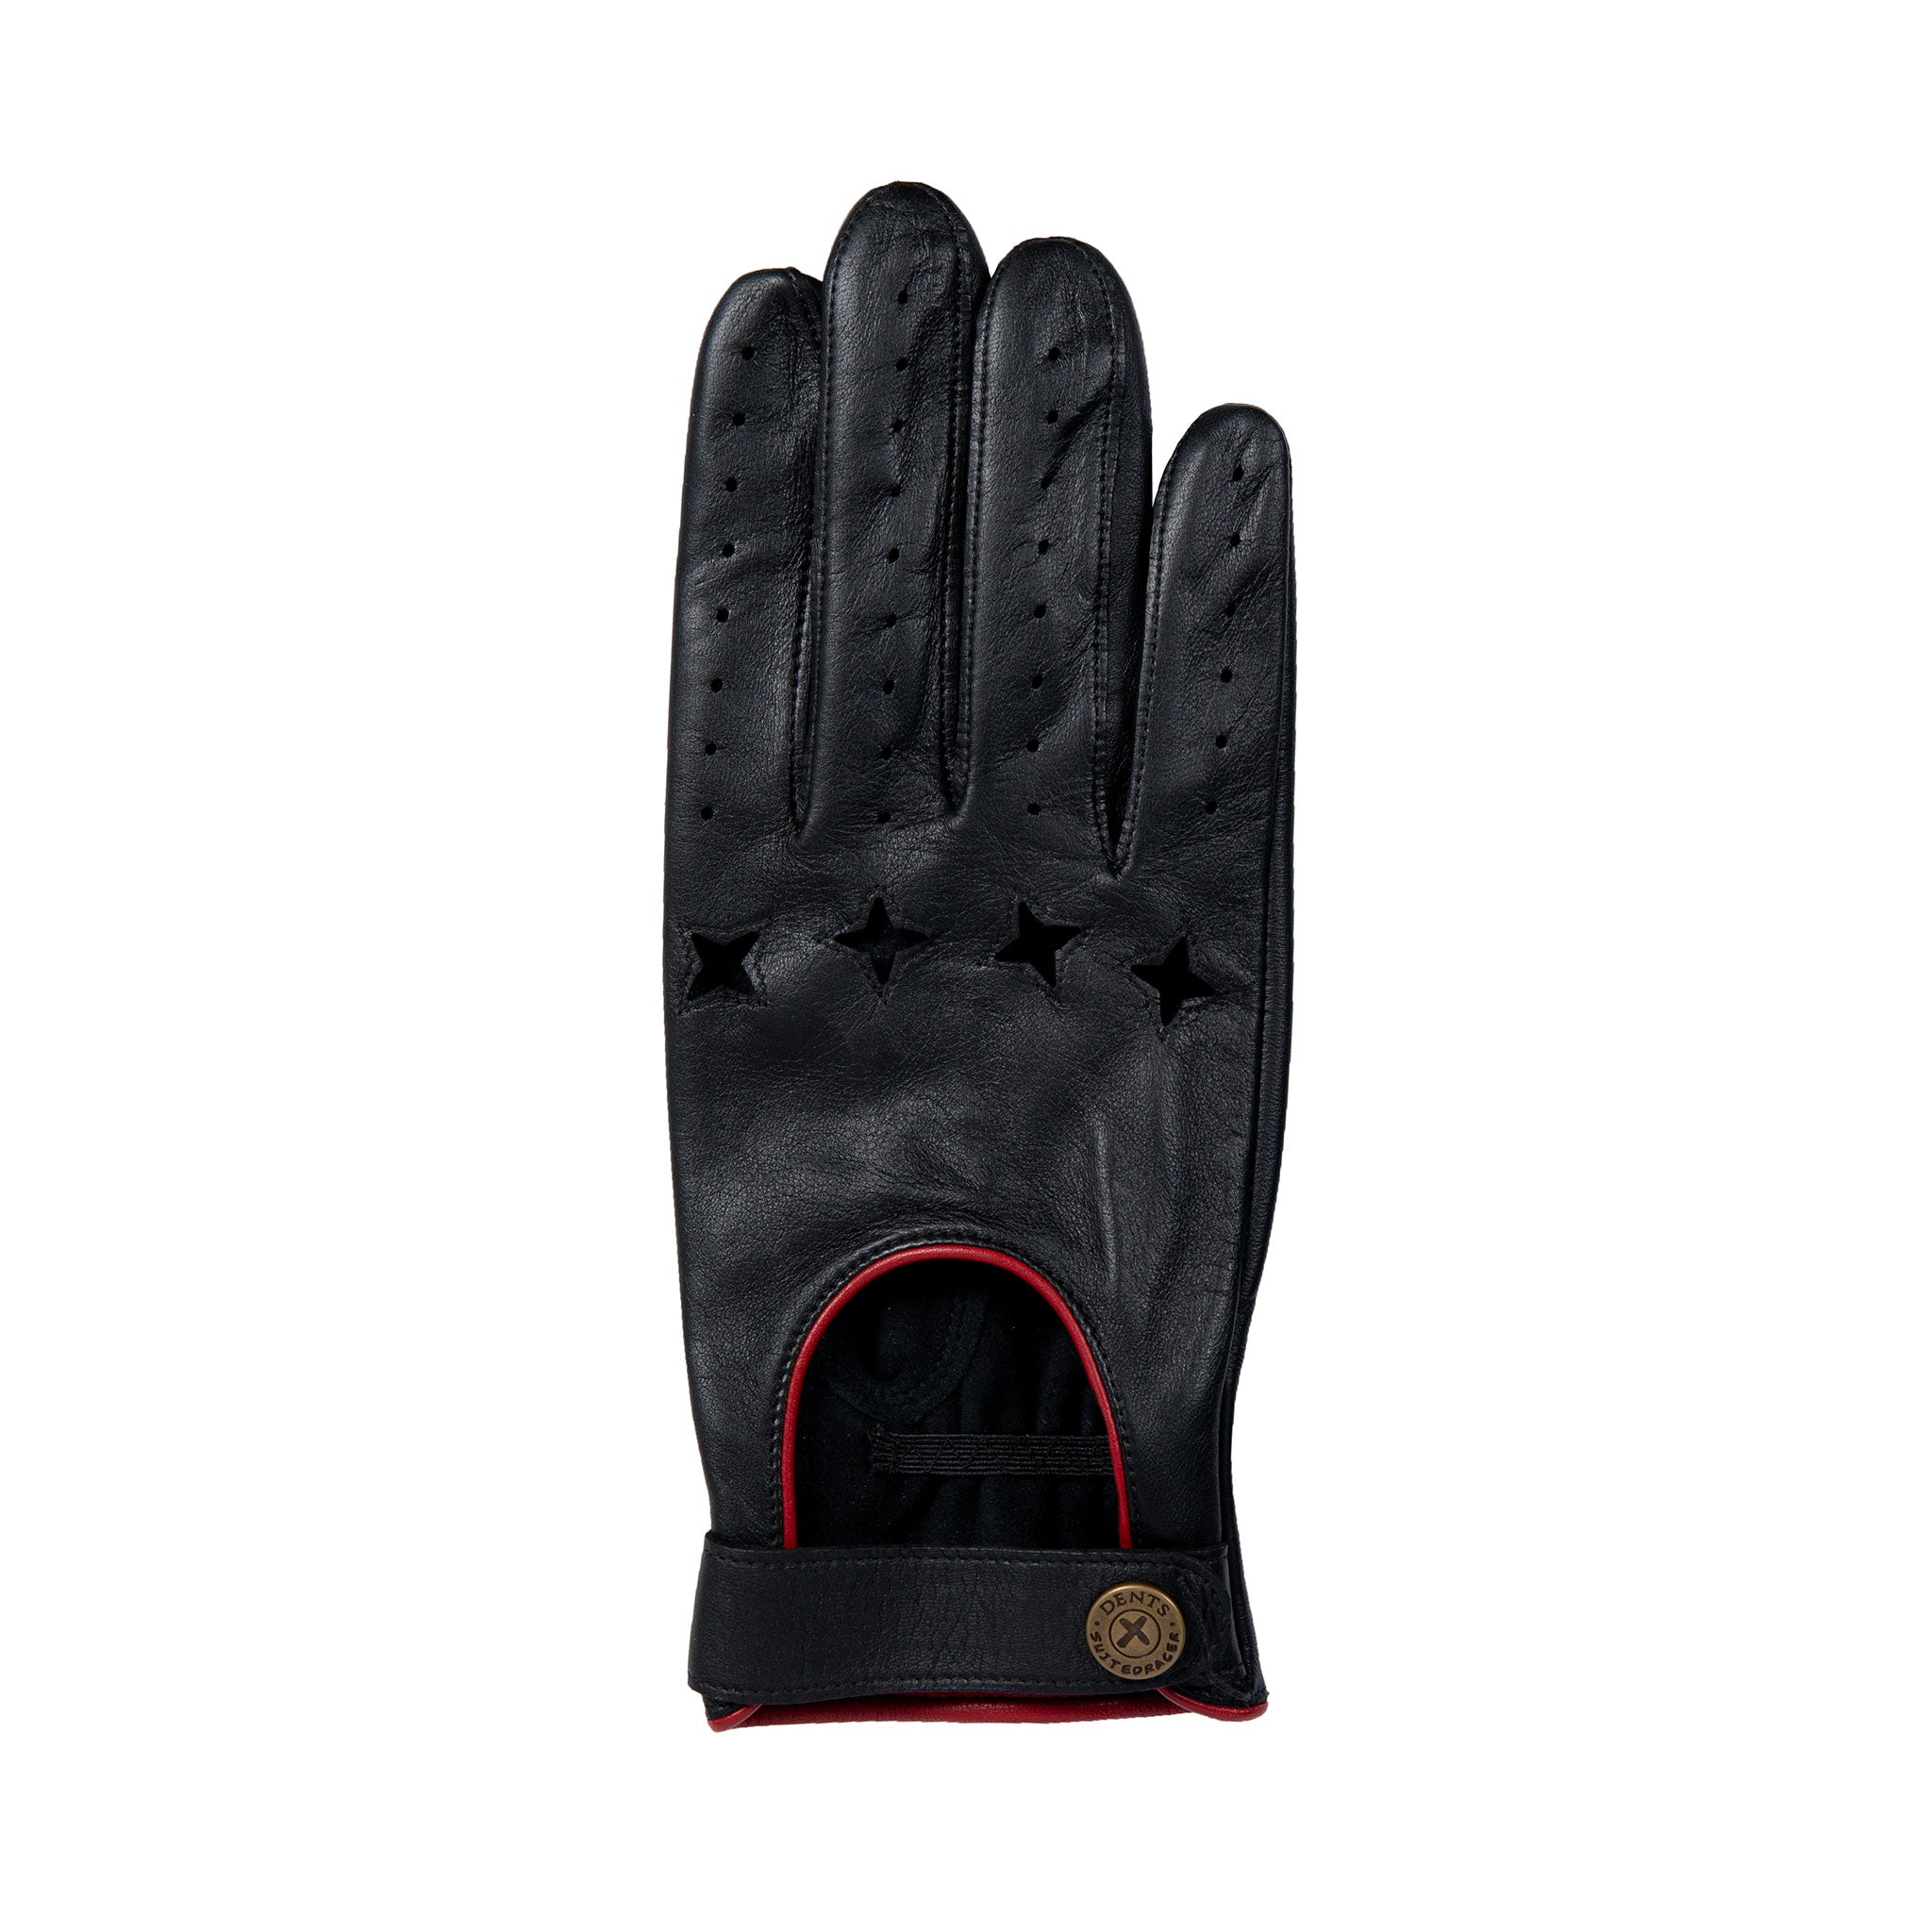 Men's The Suited Racer Touchscreen Leather Driving Gloves with Wristwatch Cut-Out, Black/Berry / XL